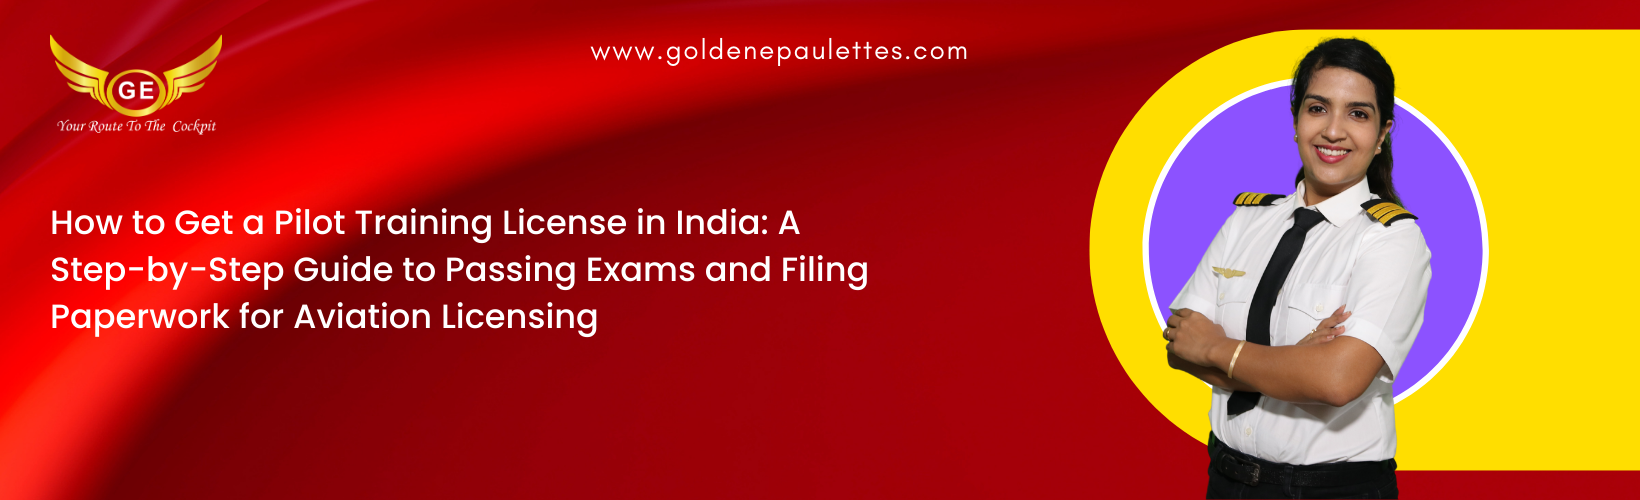 How to Get a Pilot Training License in India